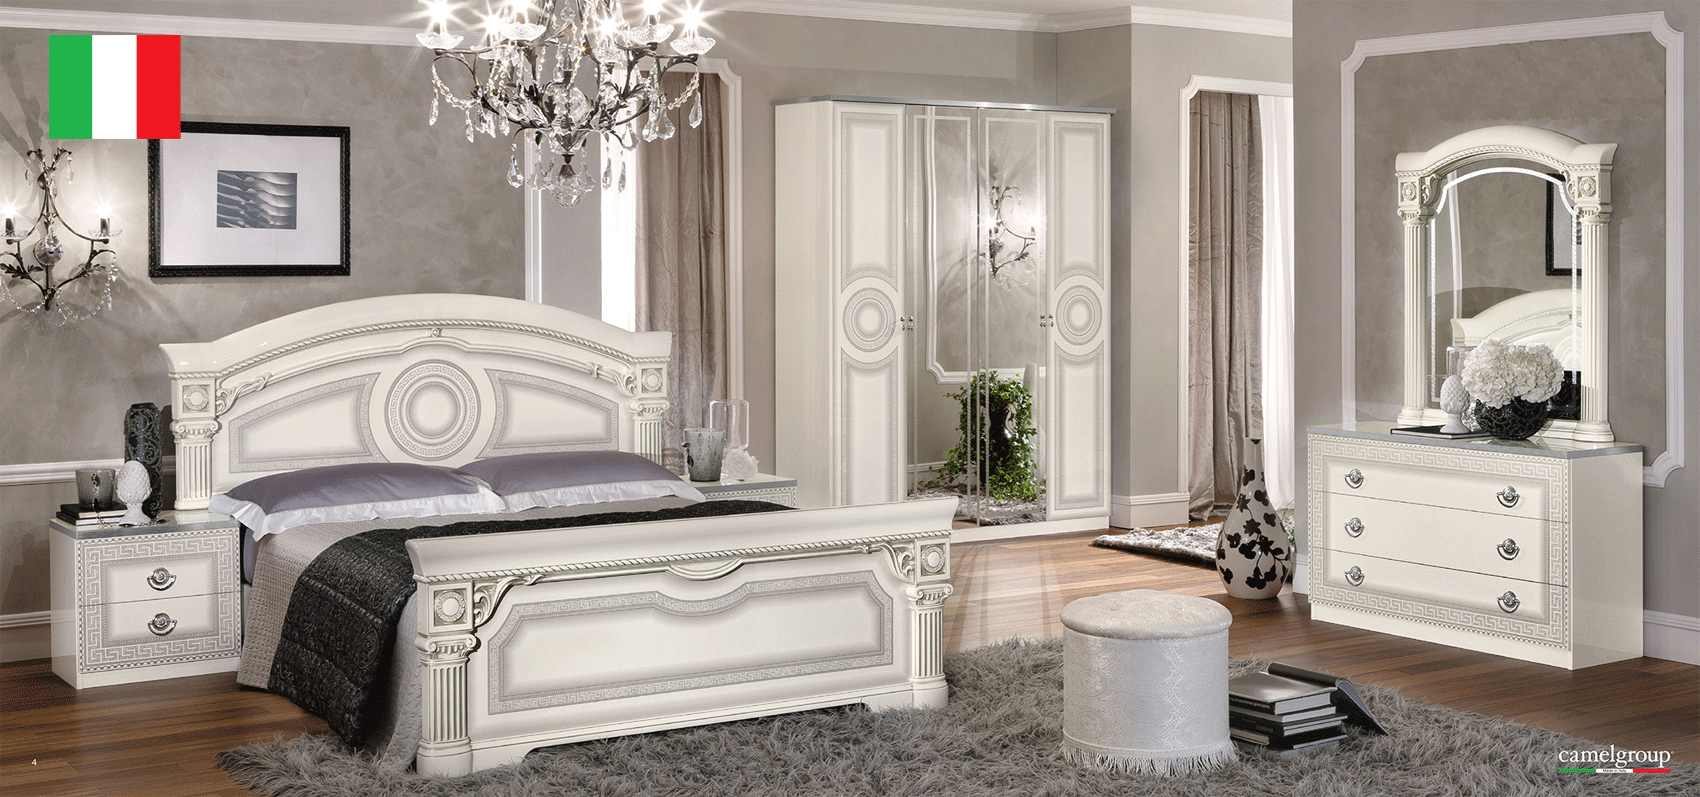 Bedroom Furniture Wardrobes Aida Bedroom, White w/Silver, Camelgroup Italy